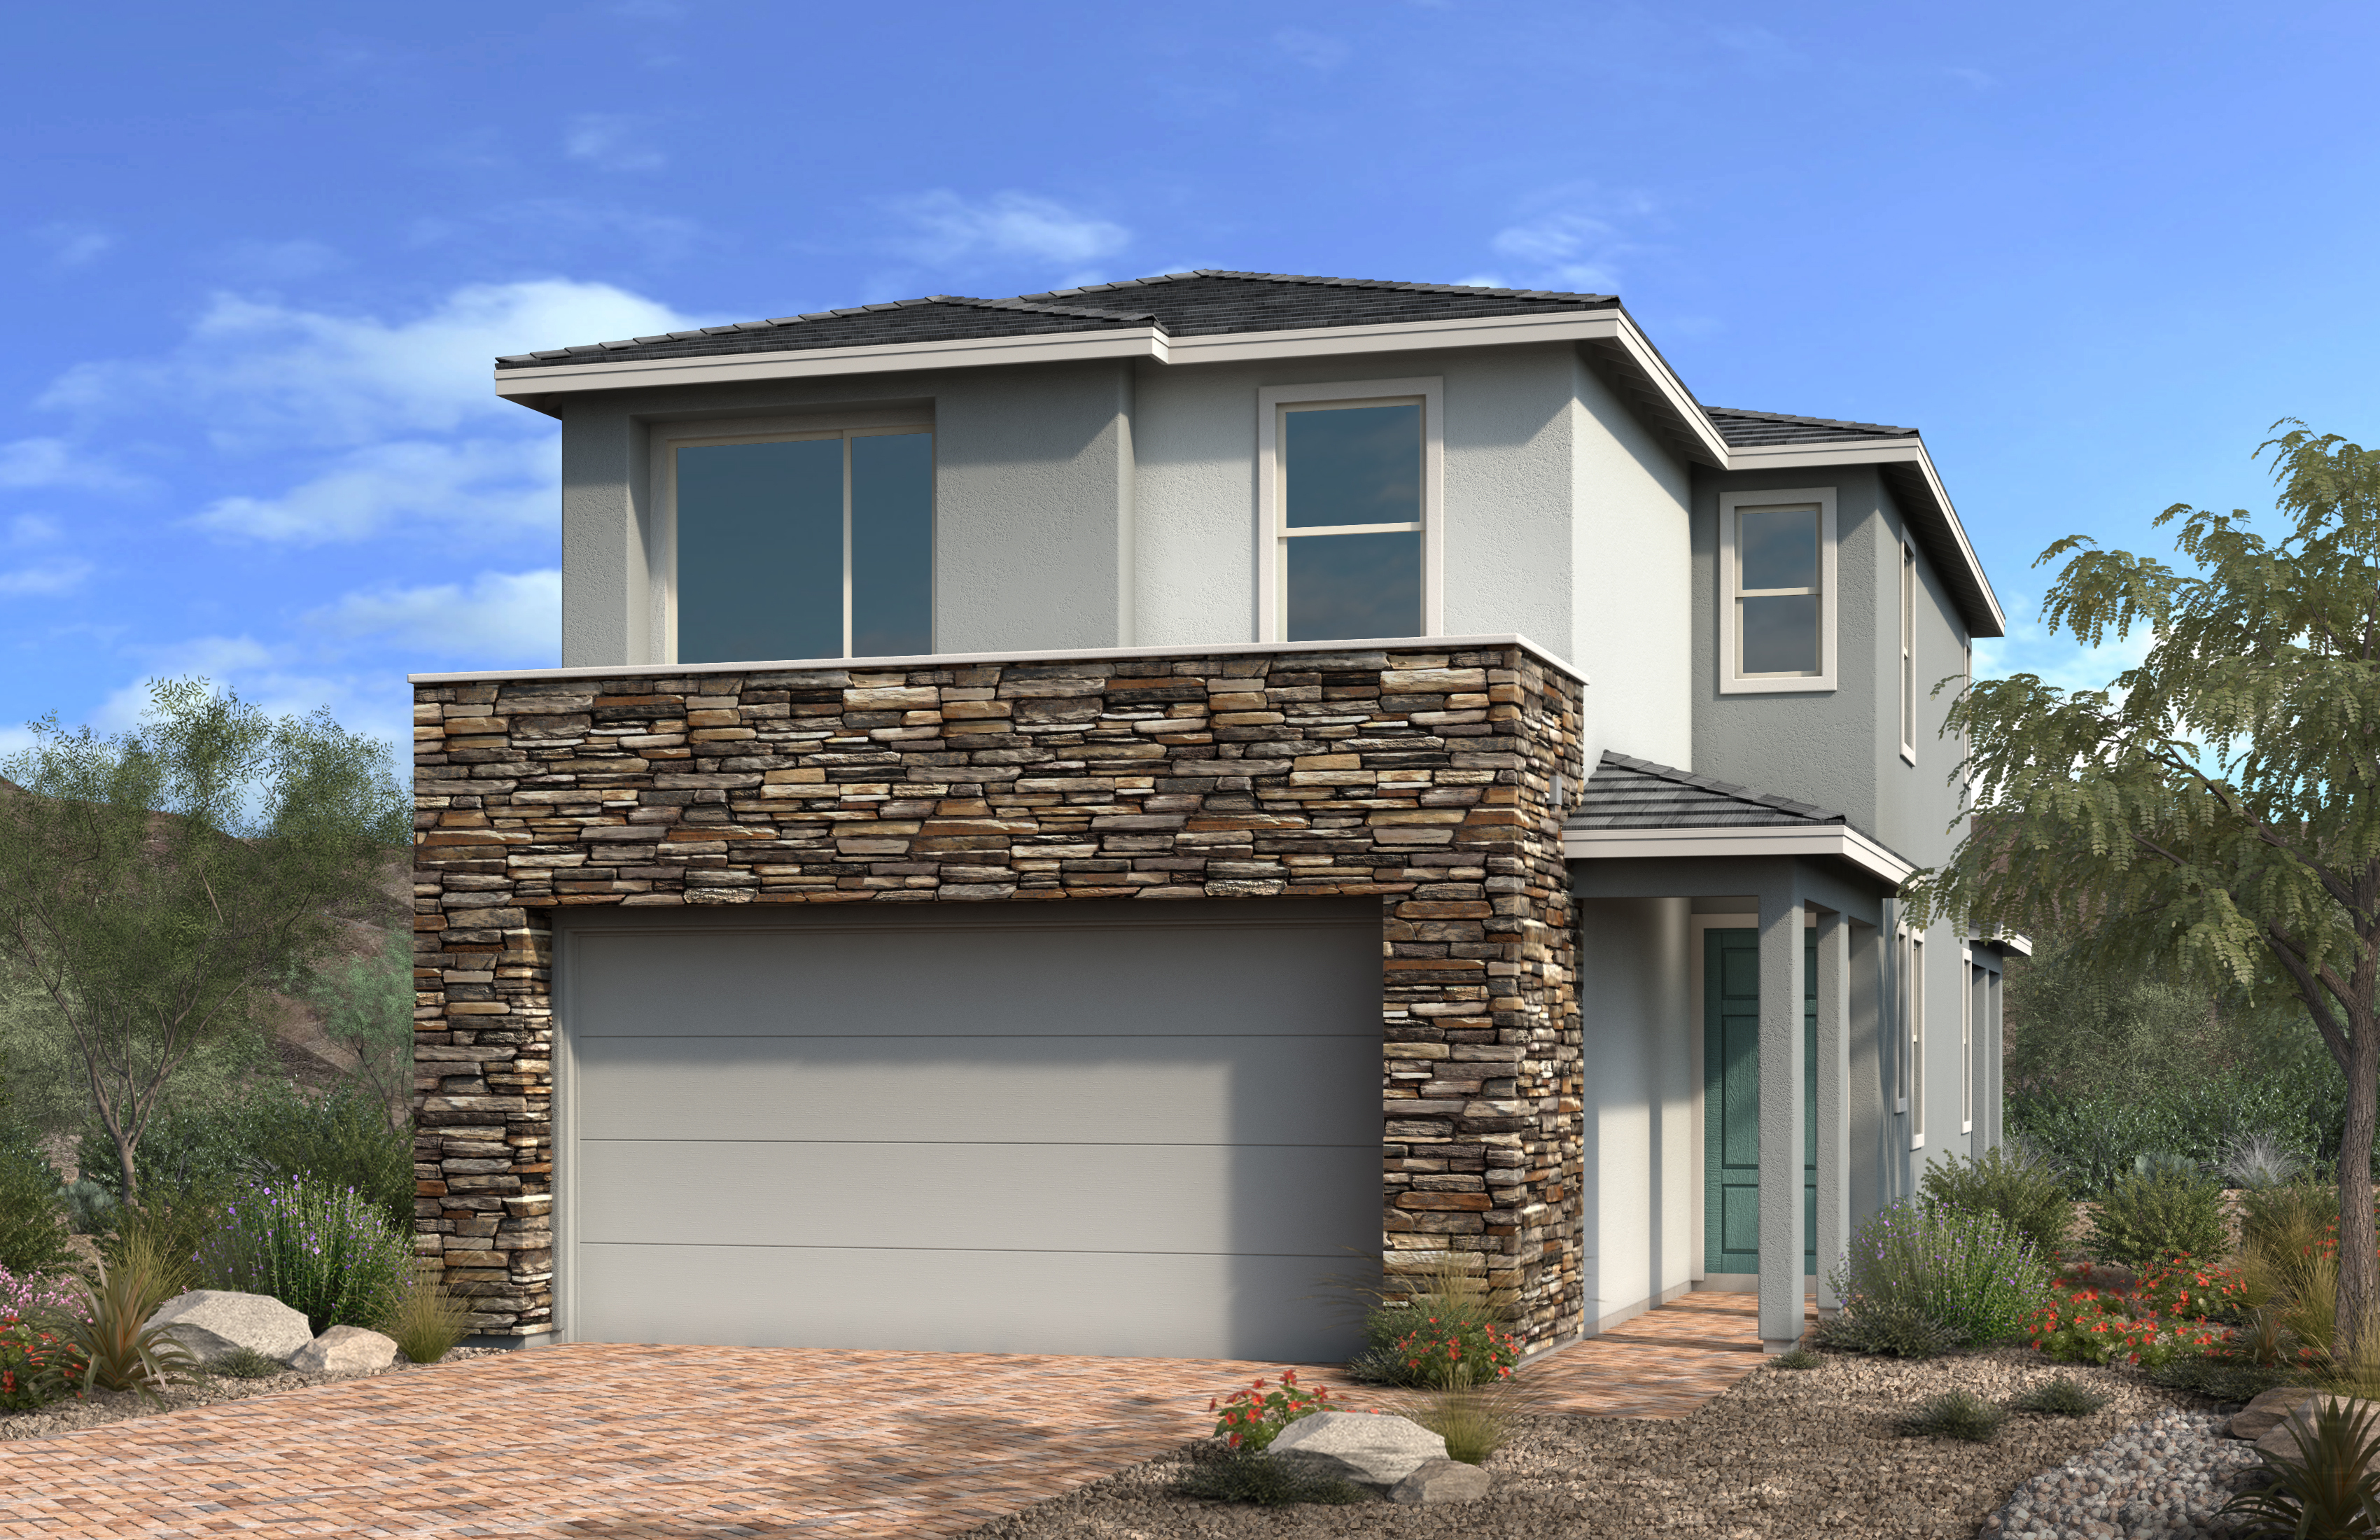 New Homes for Sale in Las Vegas, NV by KB Home